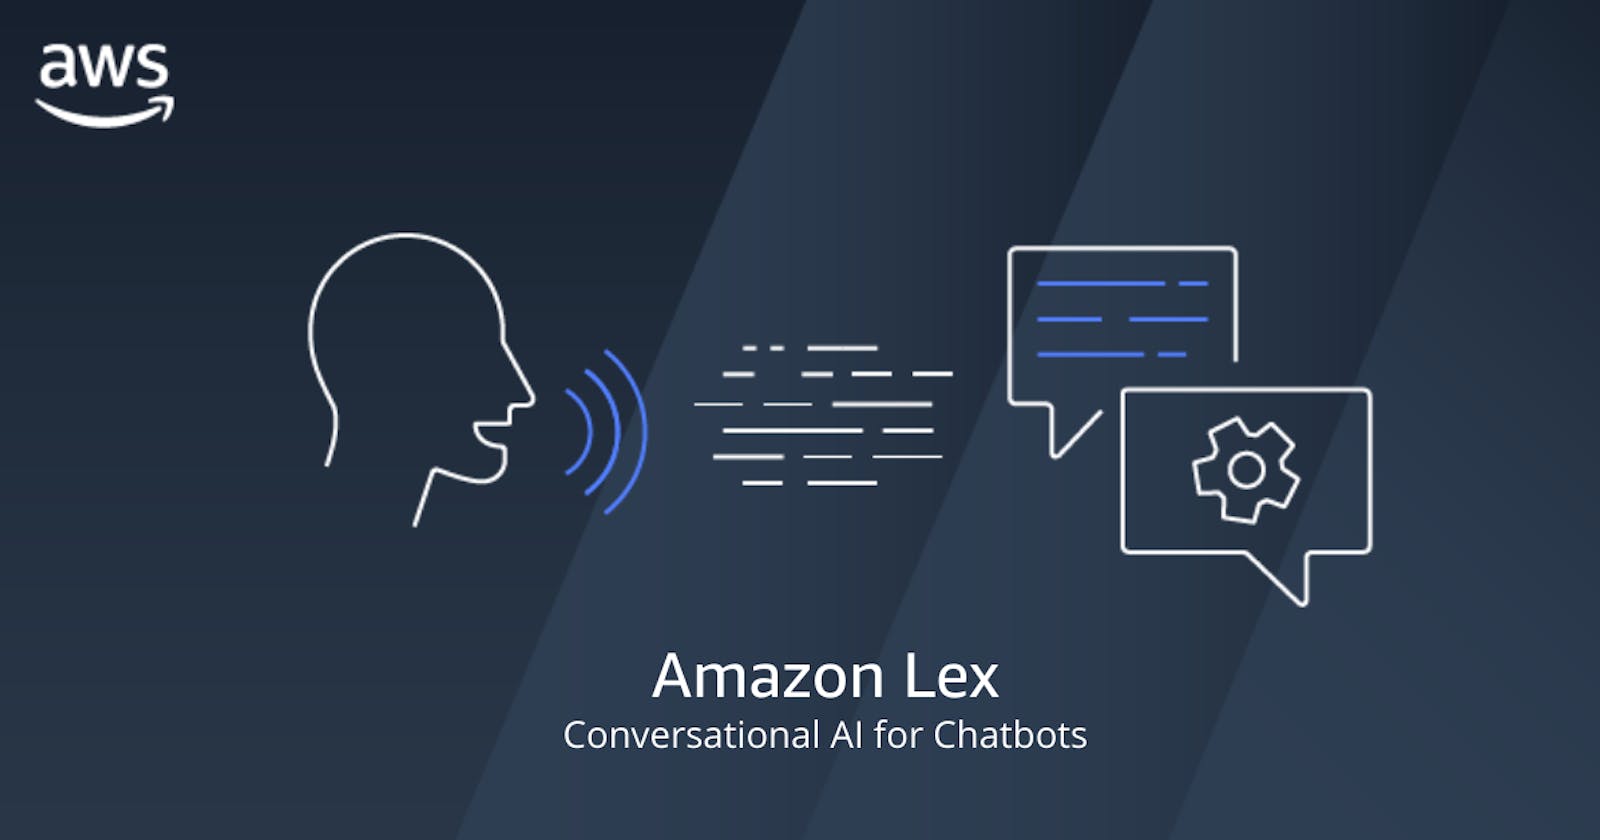 How to Use Amazon Lex in AWS